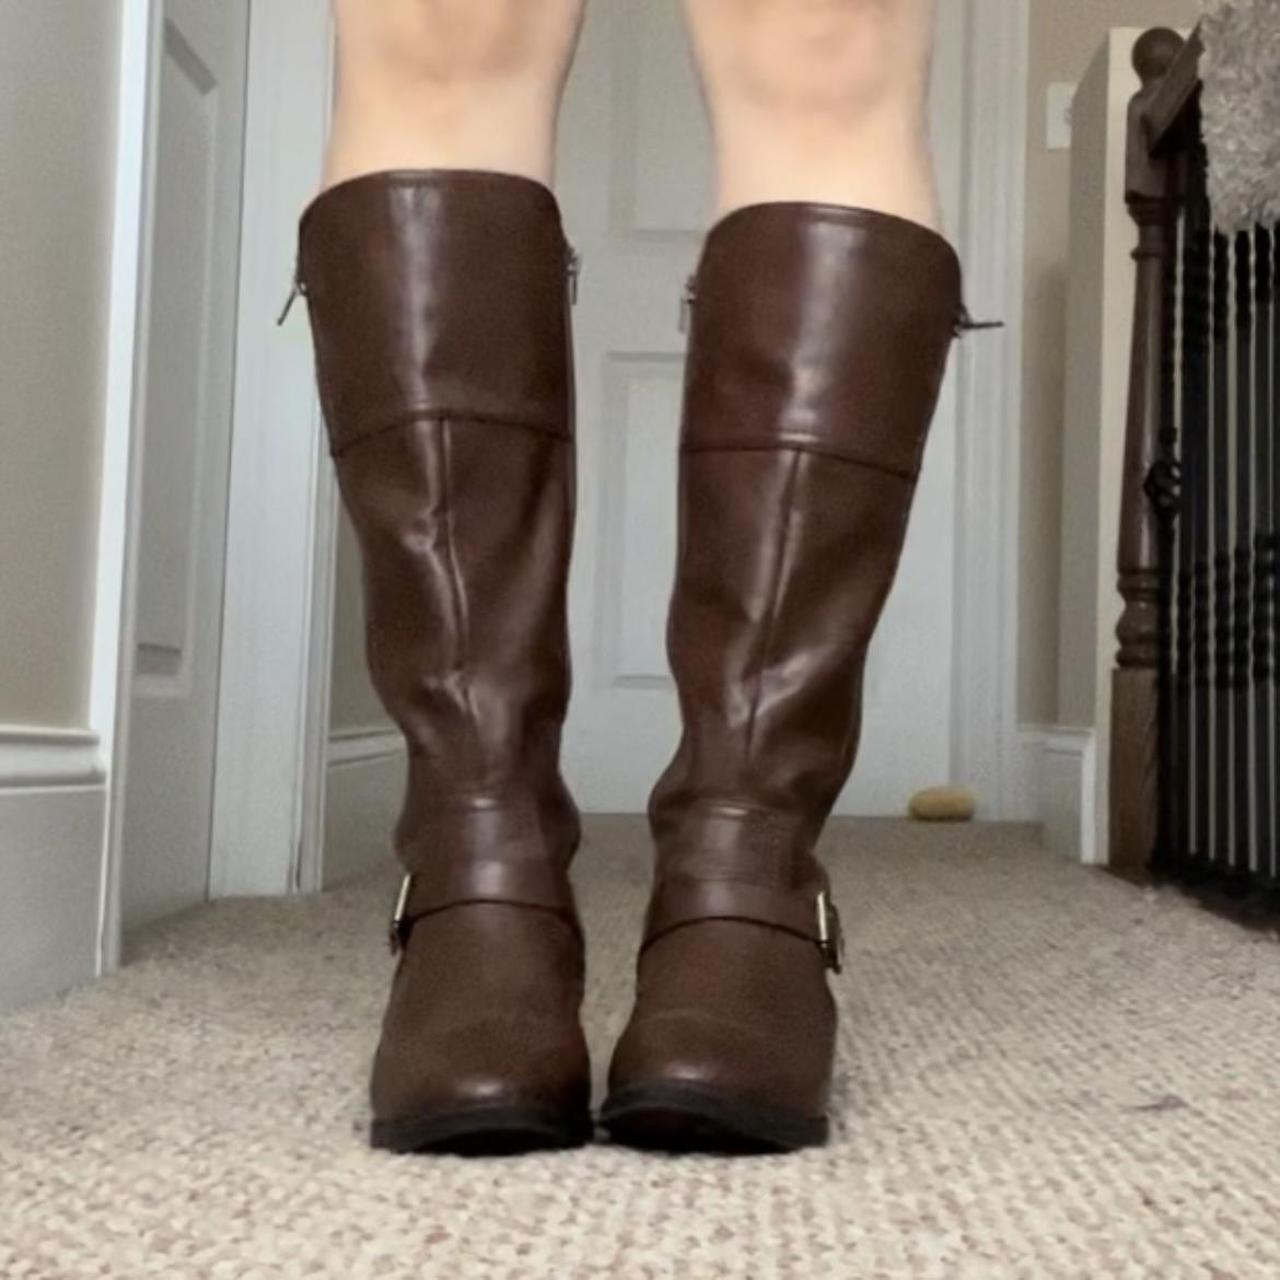 Target Women's Brown and Gold Boots (6)